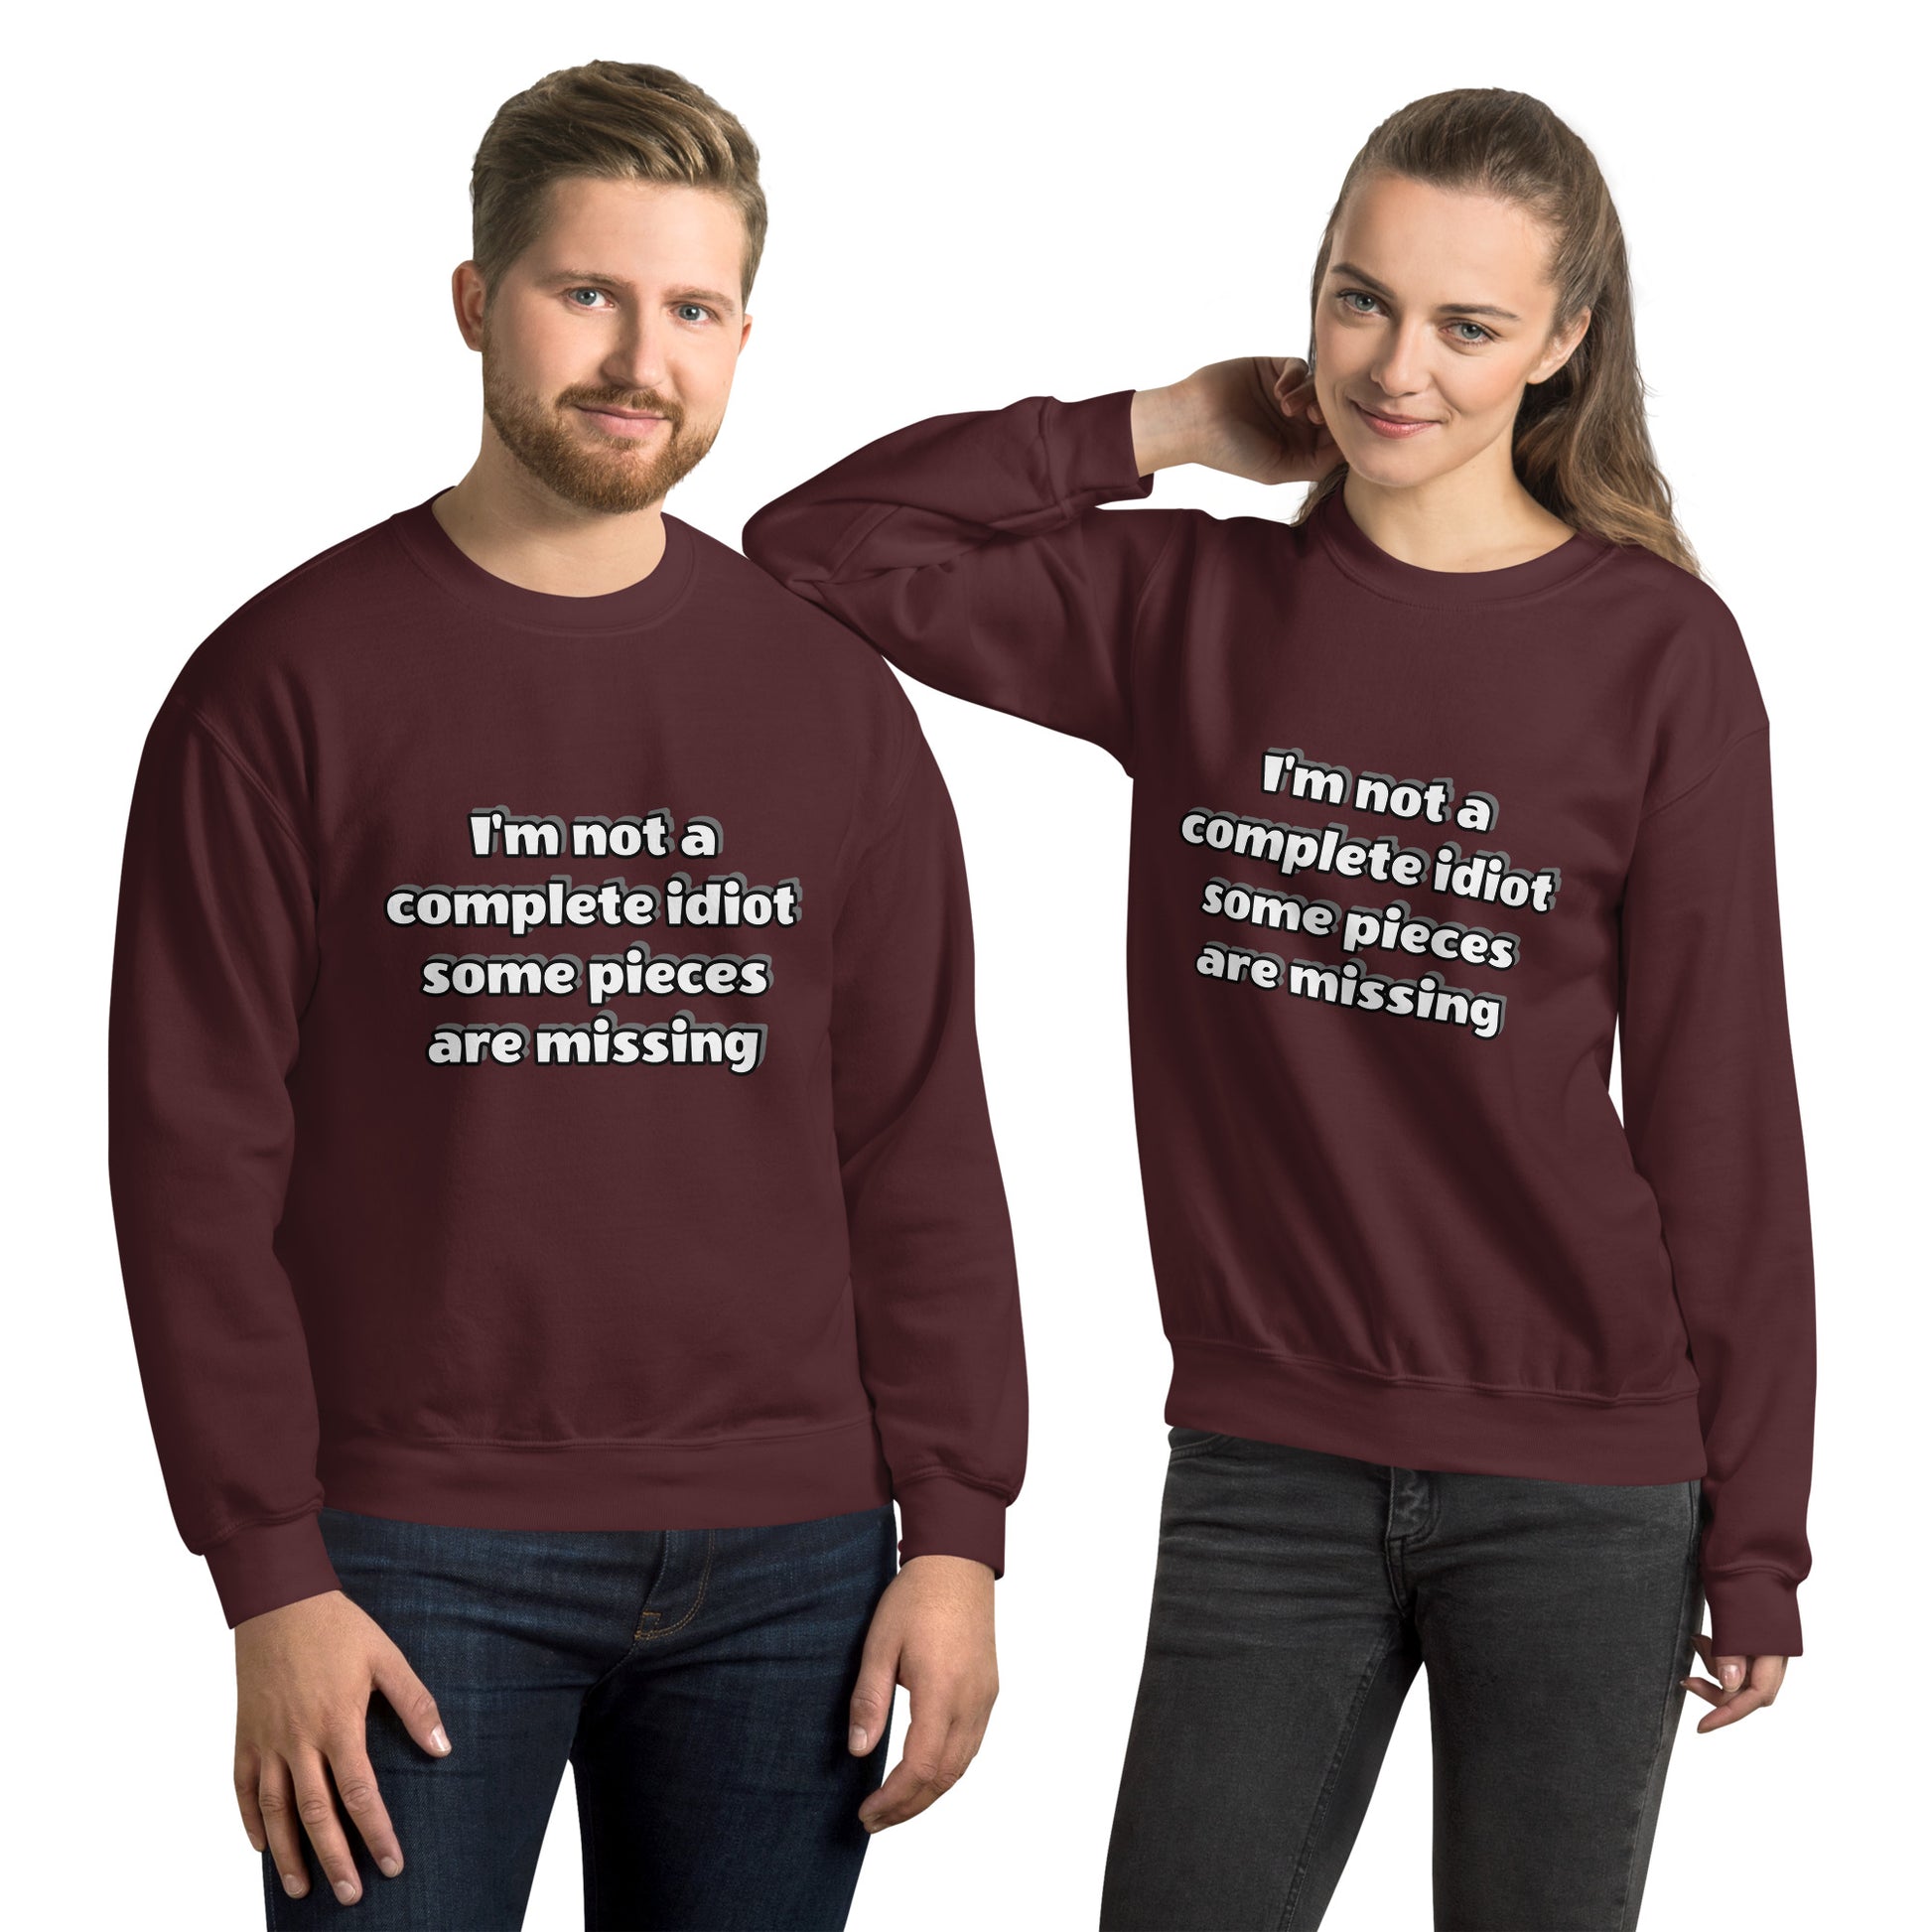 Man and women with maroon sweatshirt with text “I’m not a complete idiot, some pieces are missing”